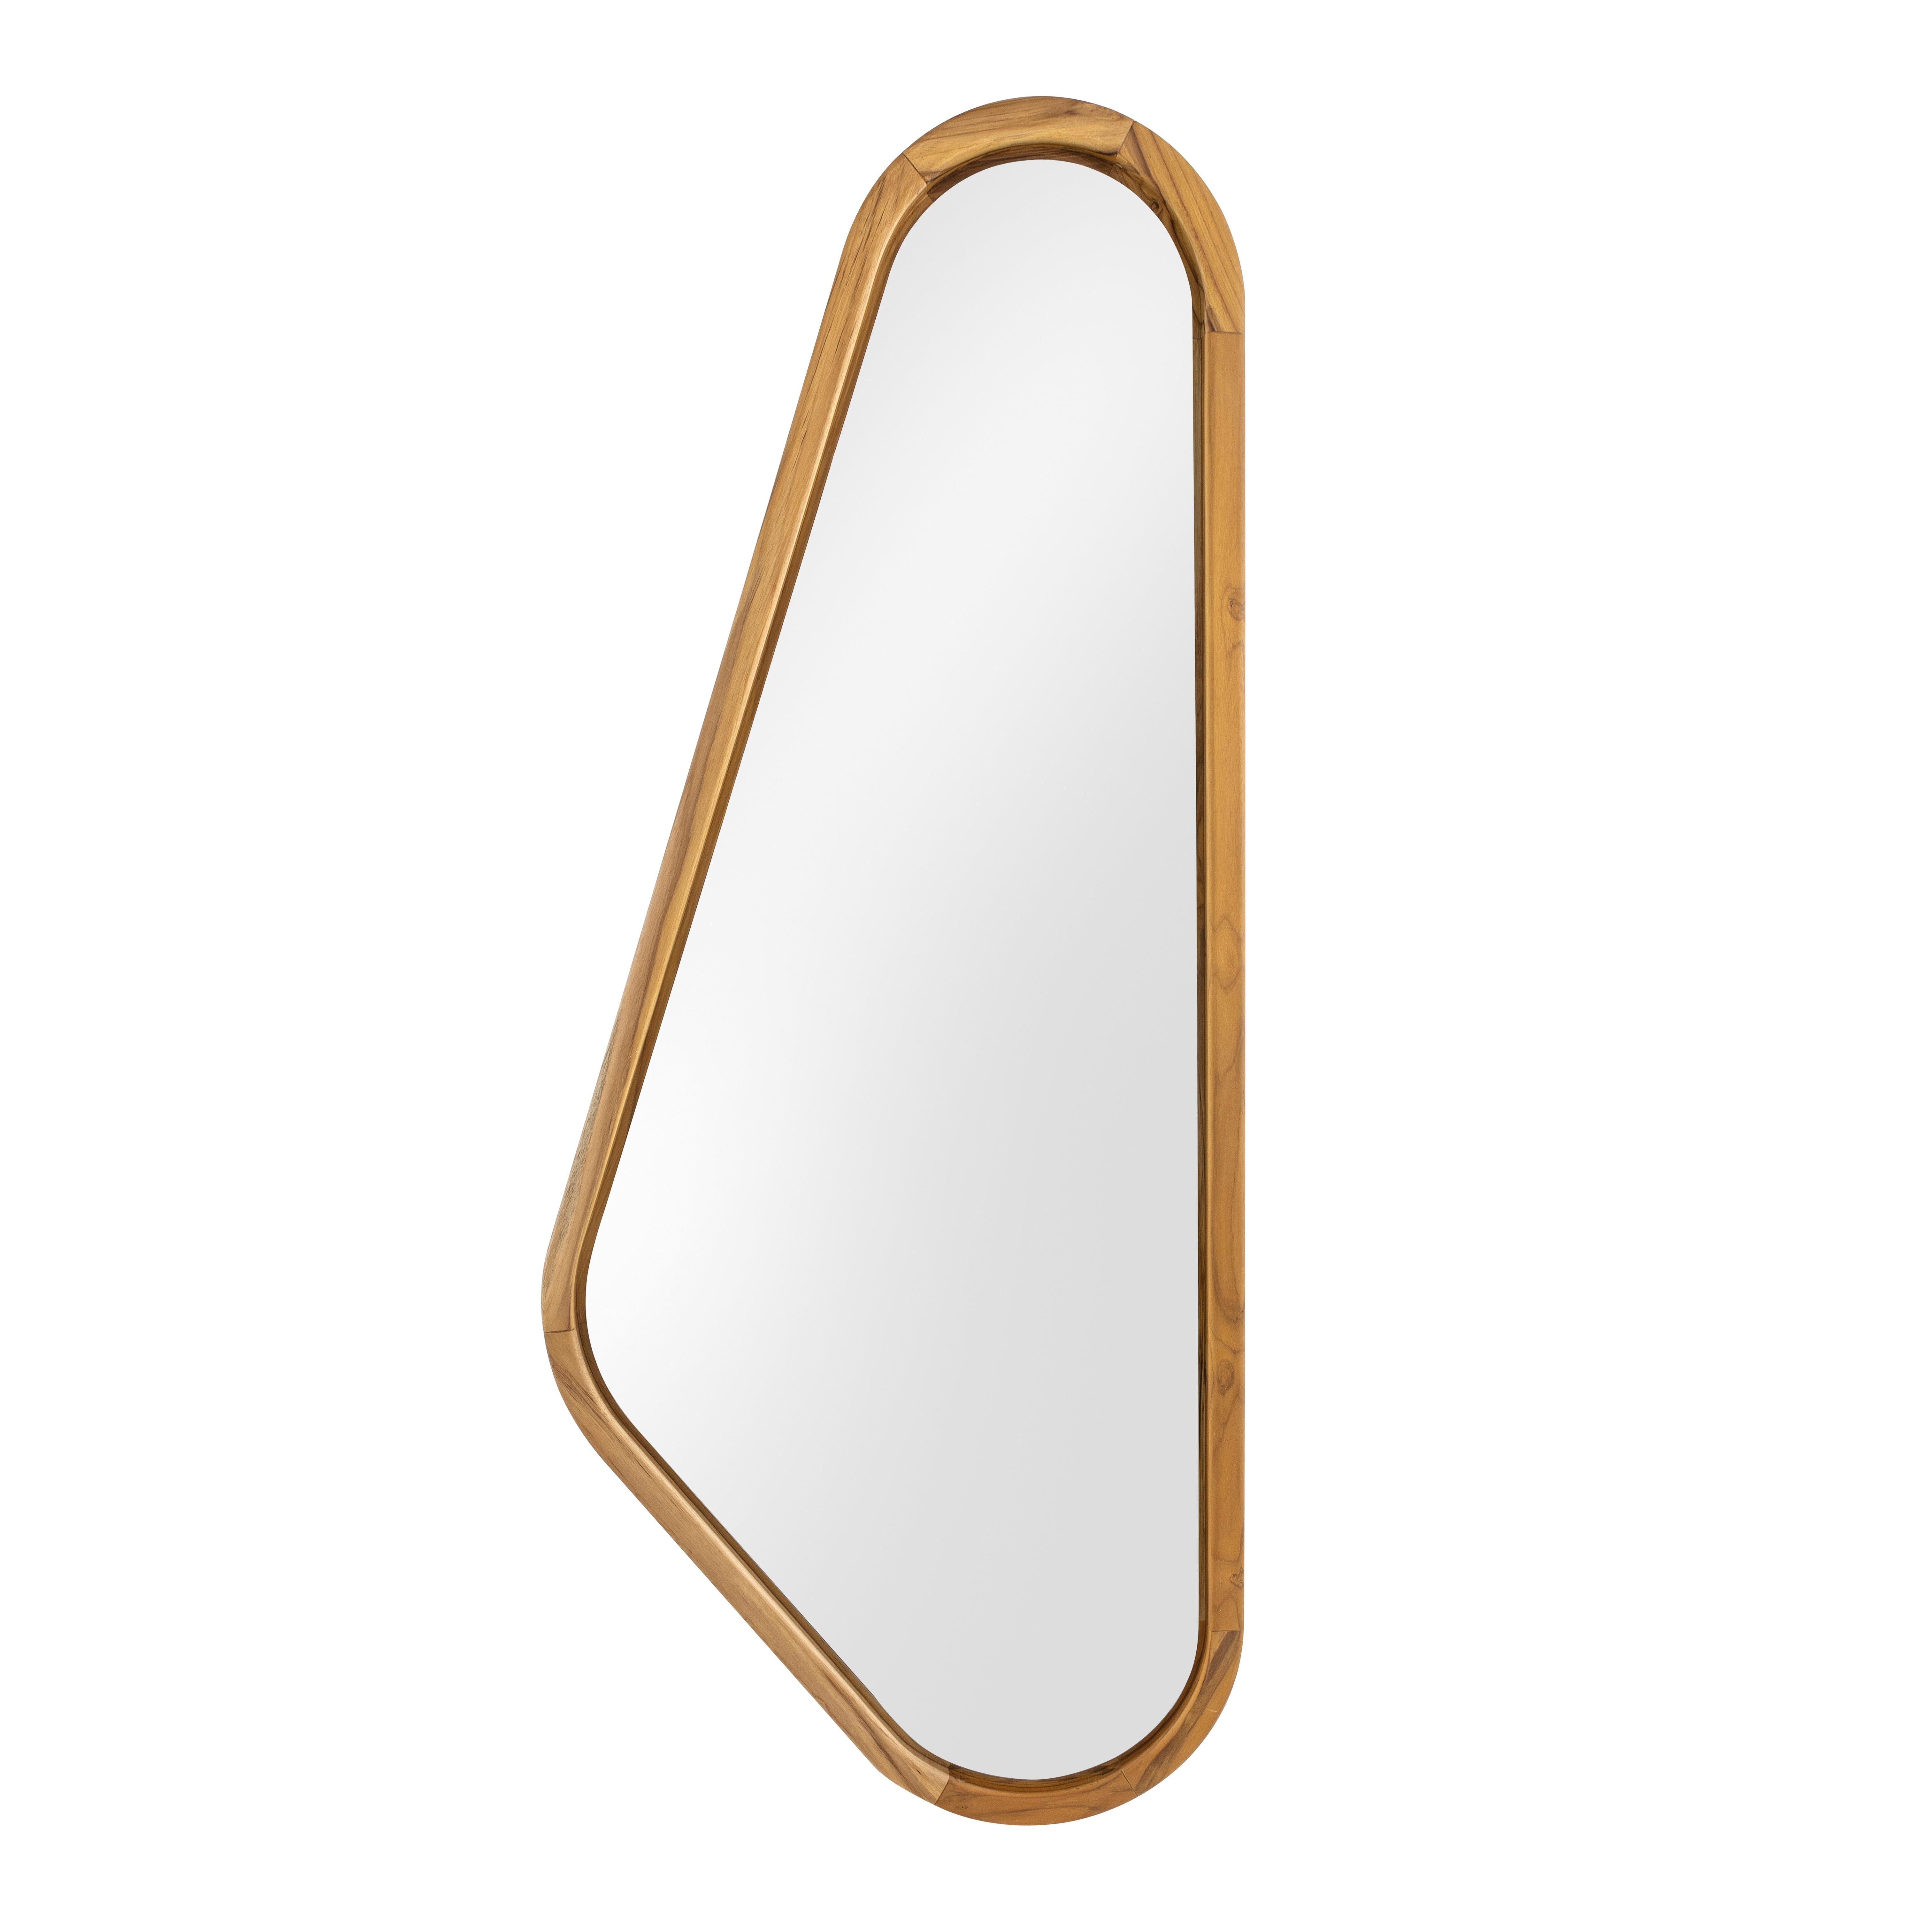 With a light and refined design, the Ali mirror incorporates a natural touch into any area of the home. Ali, which is the Italian word for ‘wings’, refers to the piece’s unique design. Together, the mirrors form two wings that bring a sense of